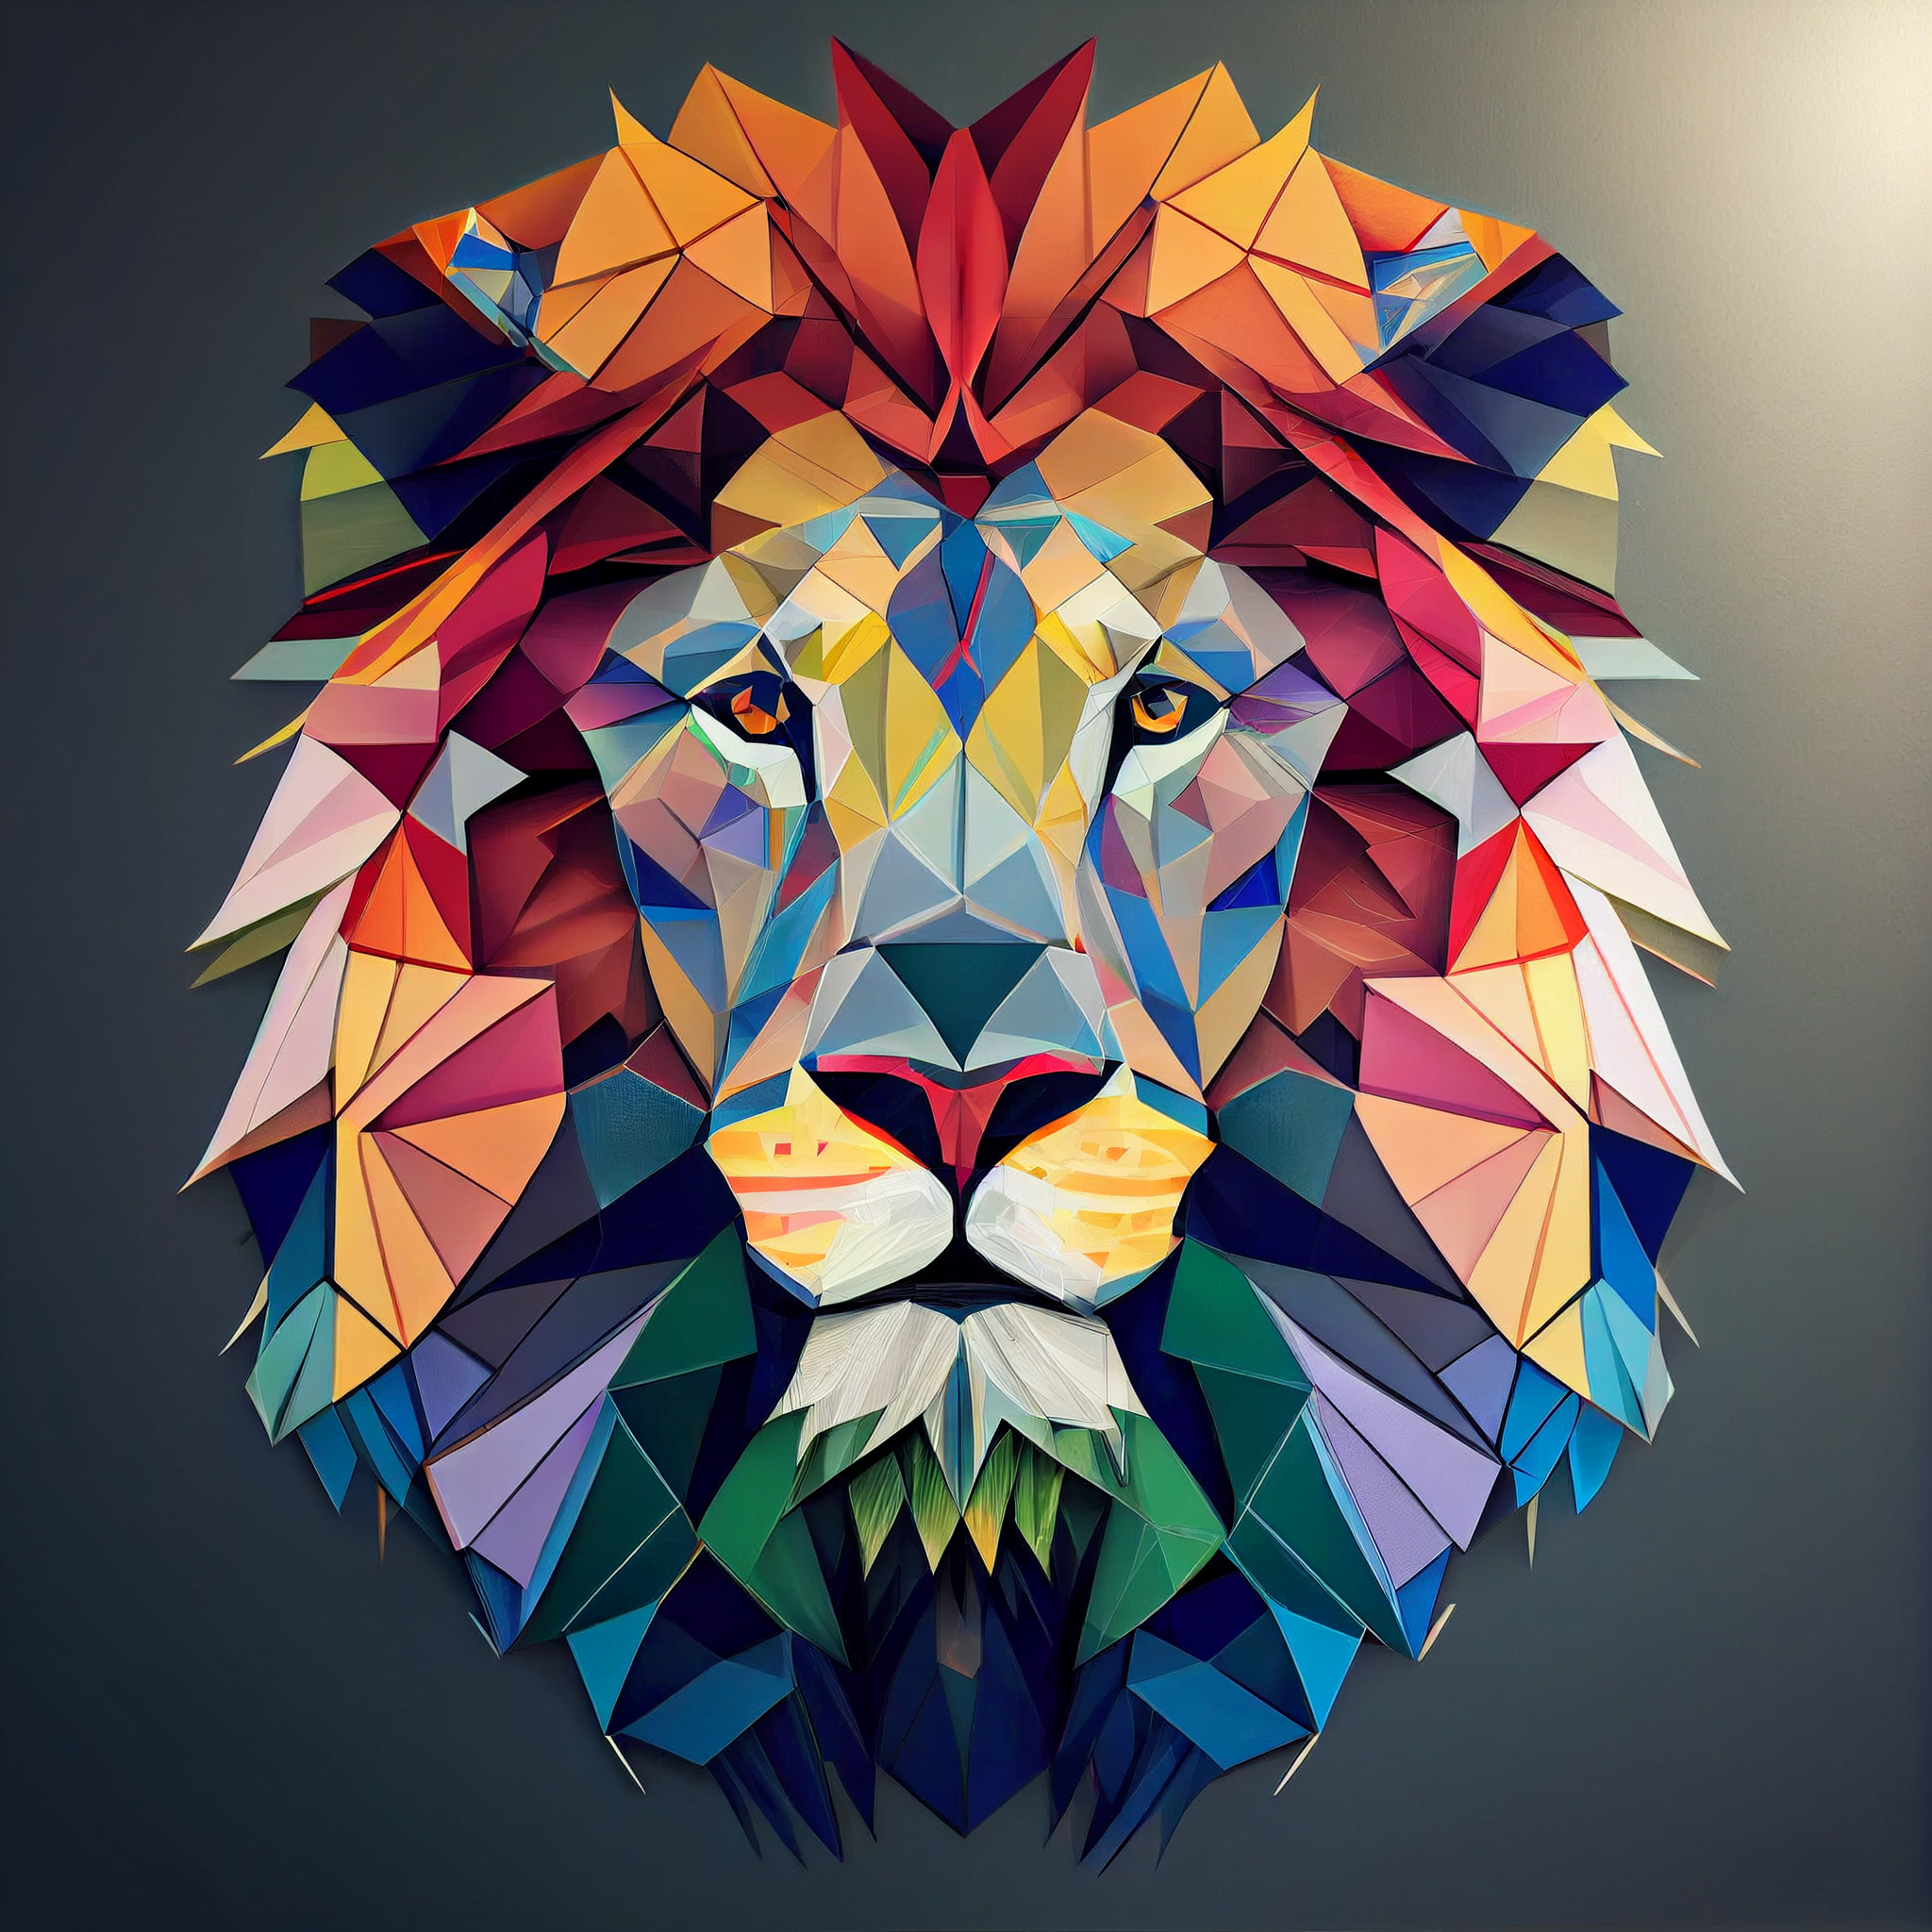 Multicolored Majesty: A Geometric Art Print of a Lion's Face